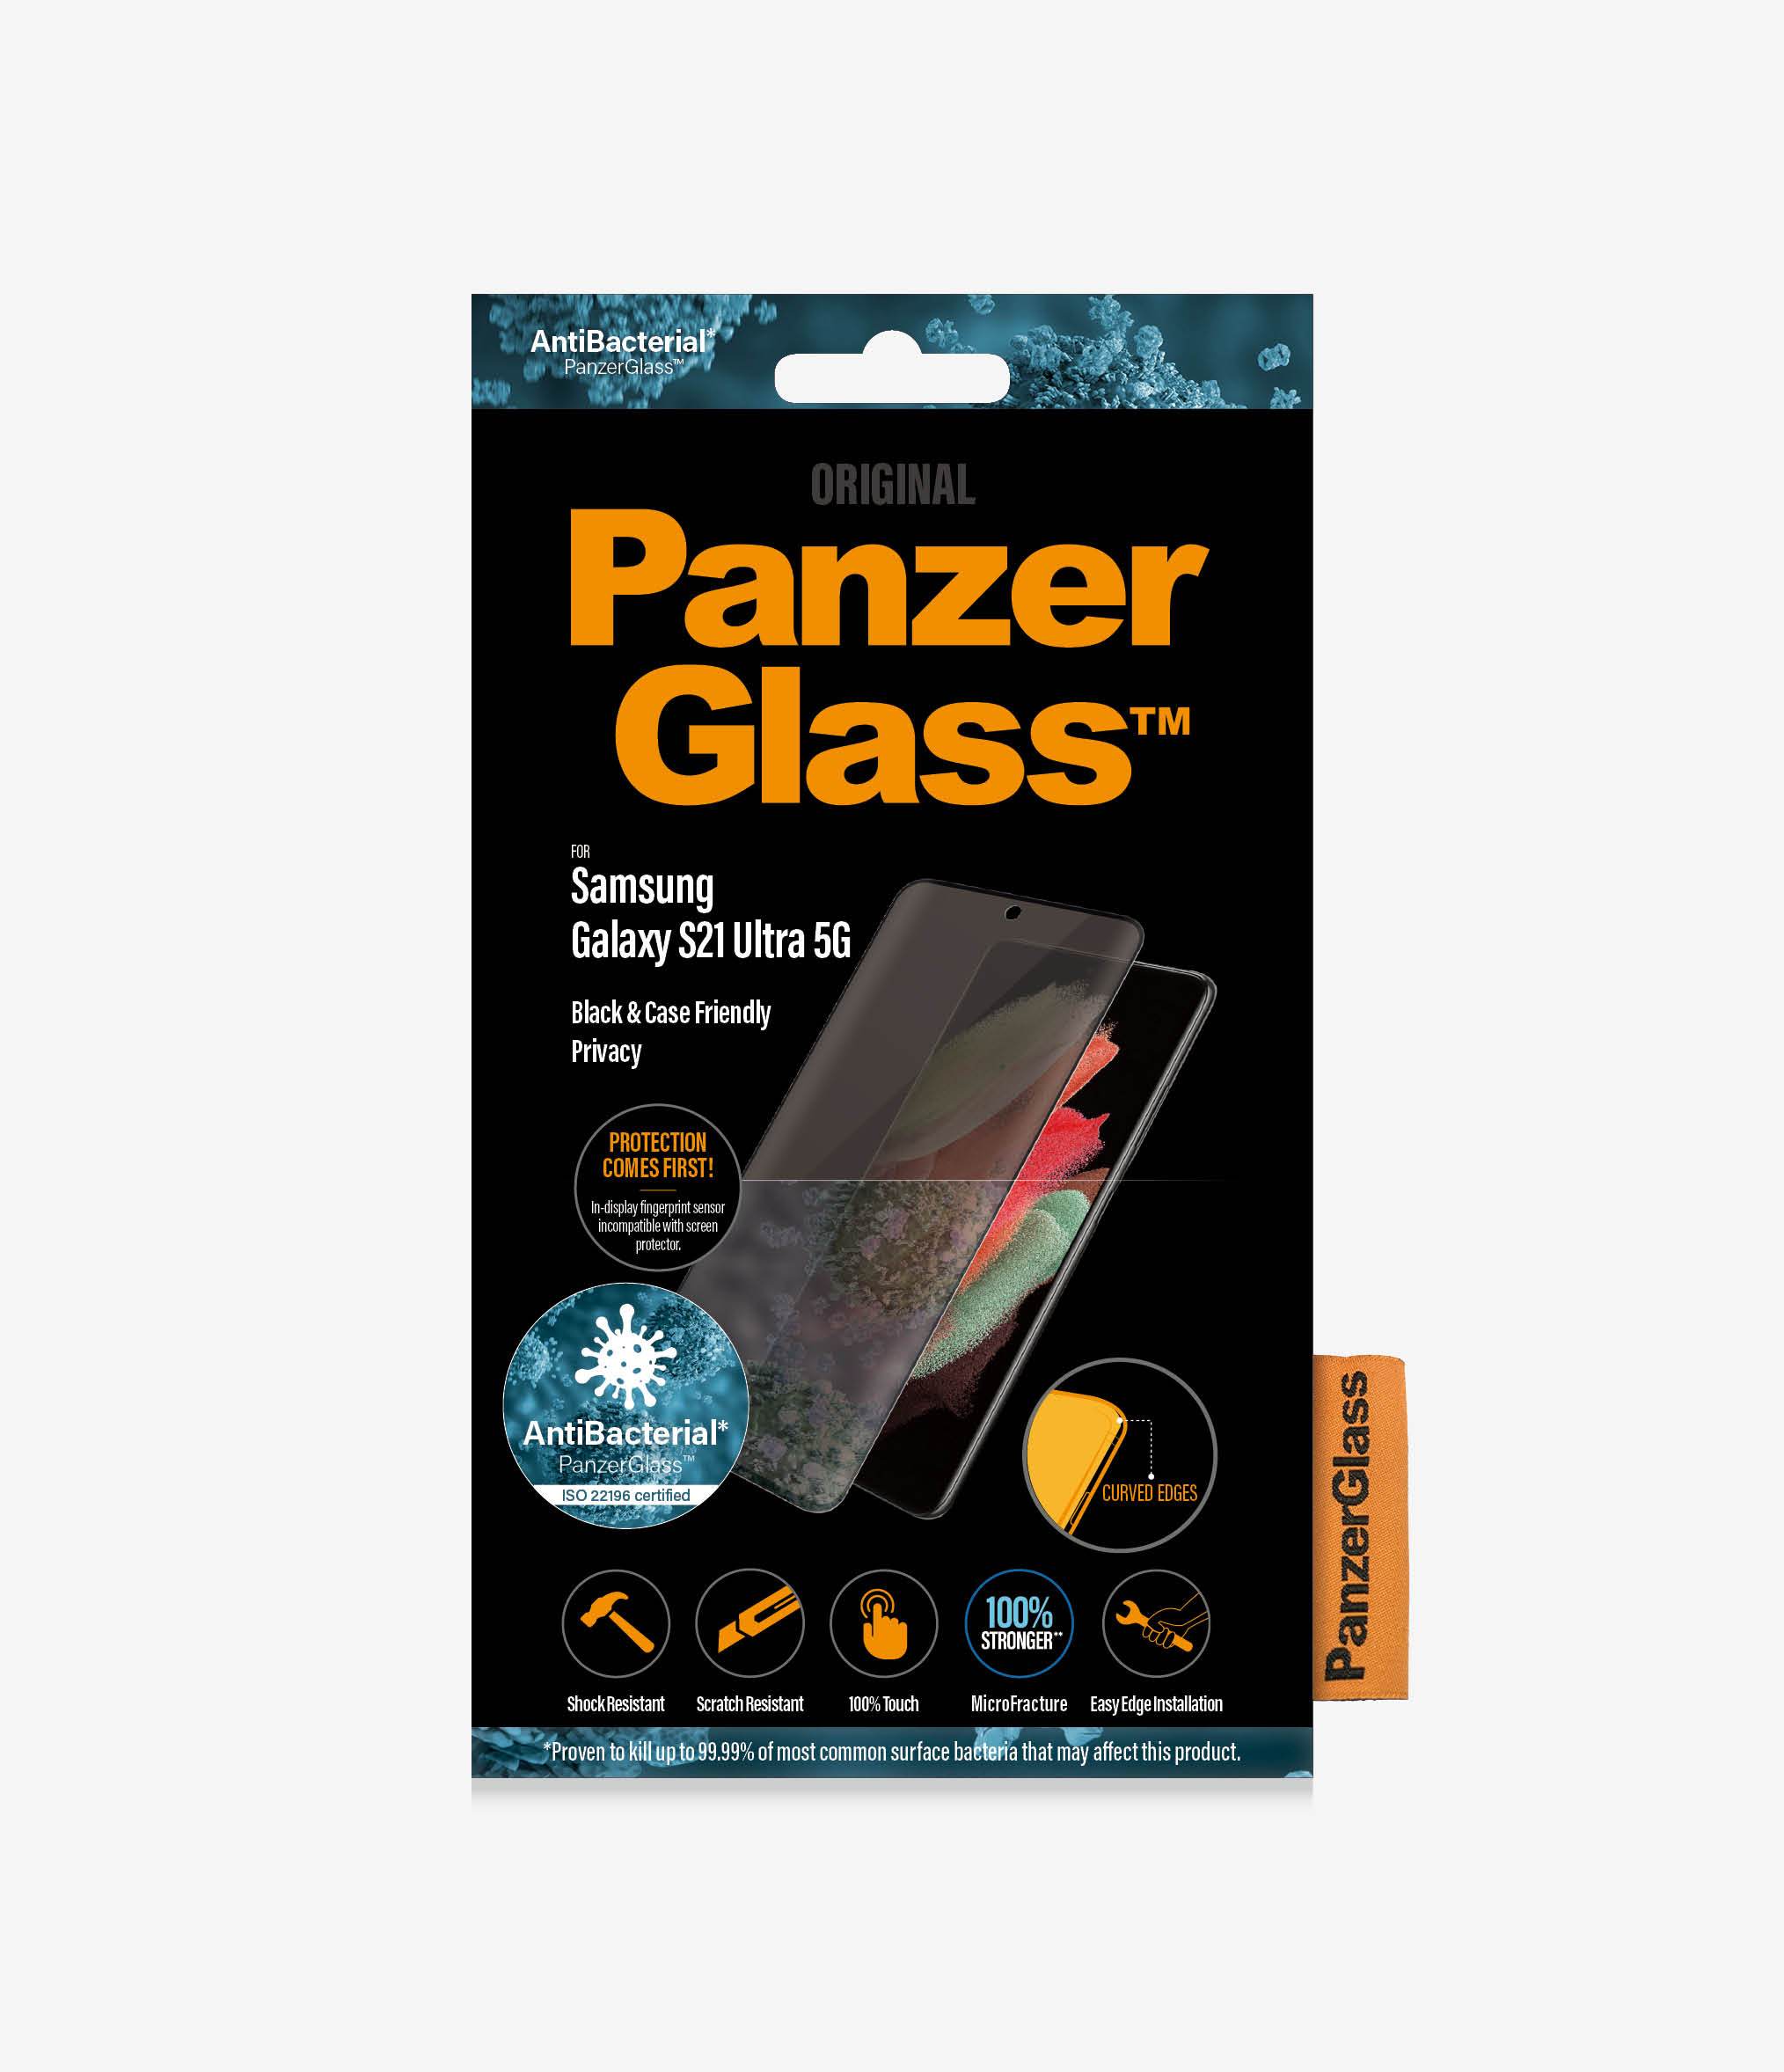 PanzerGlass™ Apple iPad Pro 12.9' (2018/2020/2021) - AntiBacterial (2656) - Screen Protector - Rounded edges, Crystal Clear, 100% touch preservation